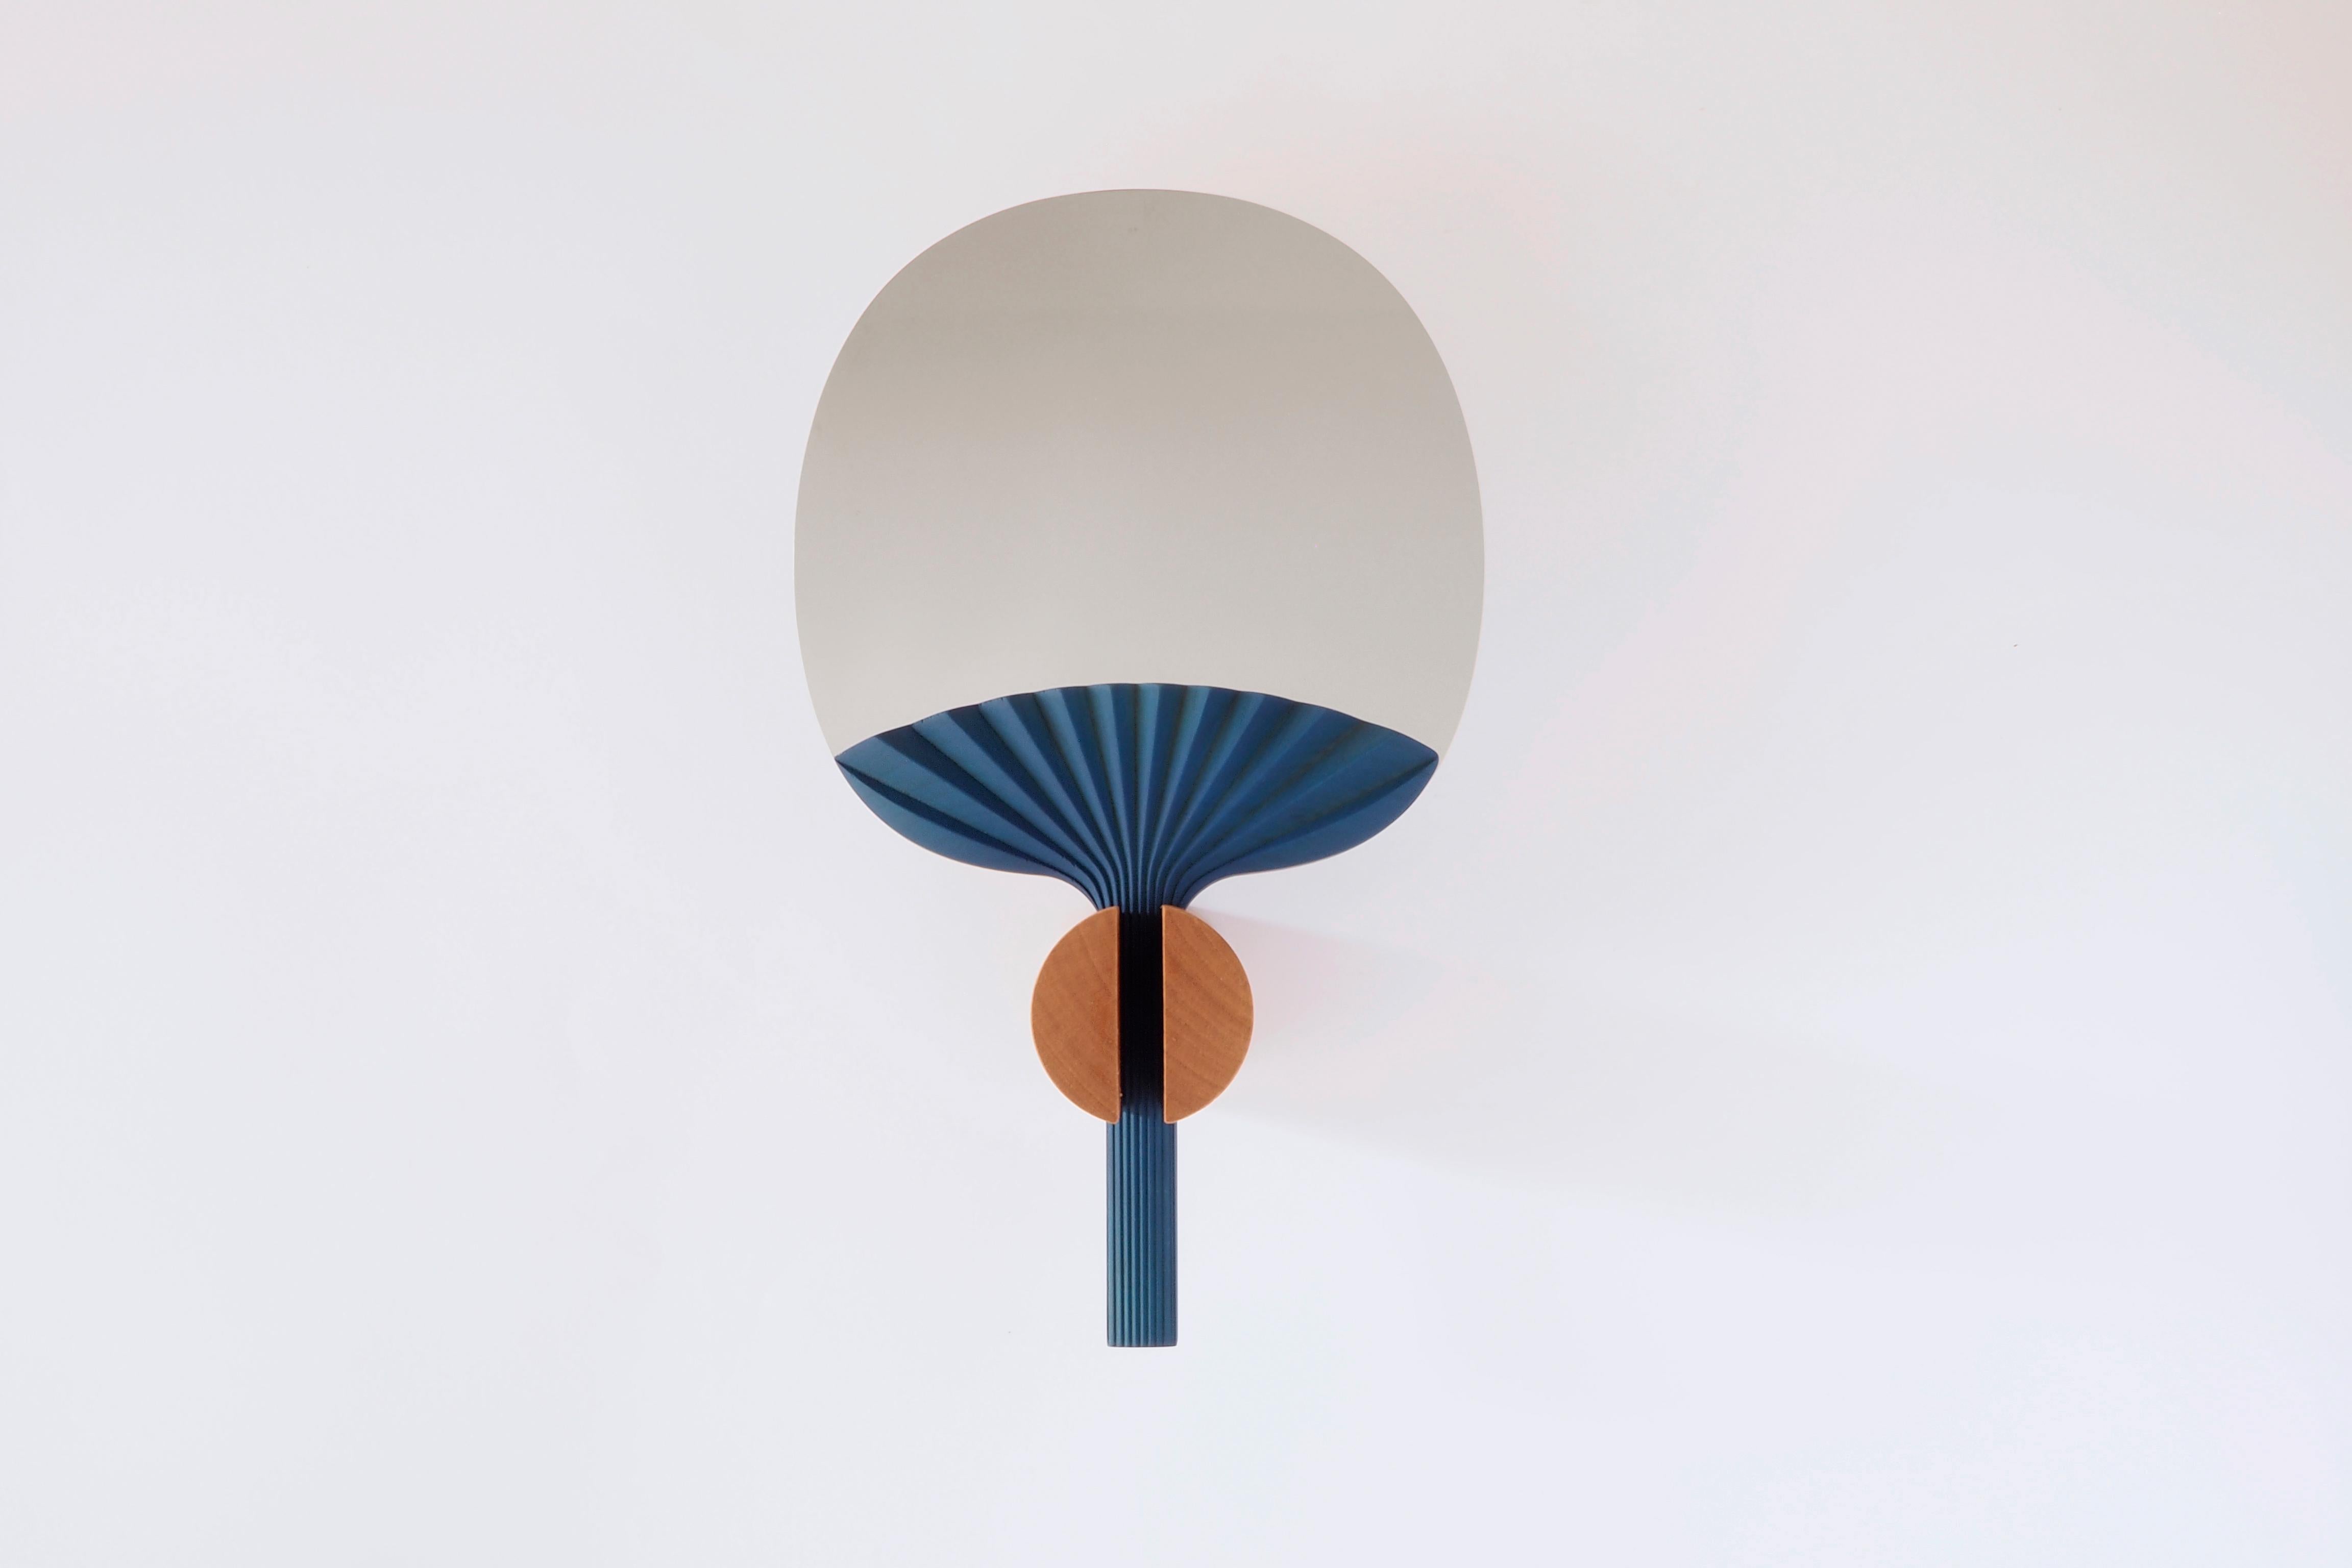 The appeal of the Silk Road – the route which connected the East to the West, reaching as far as Venice –is brought back to life by this object inspired by Chinese fans, where the mirror is offered as a refined female
accessory.
The lightness and